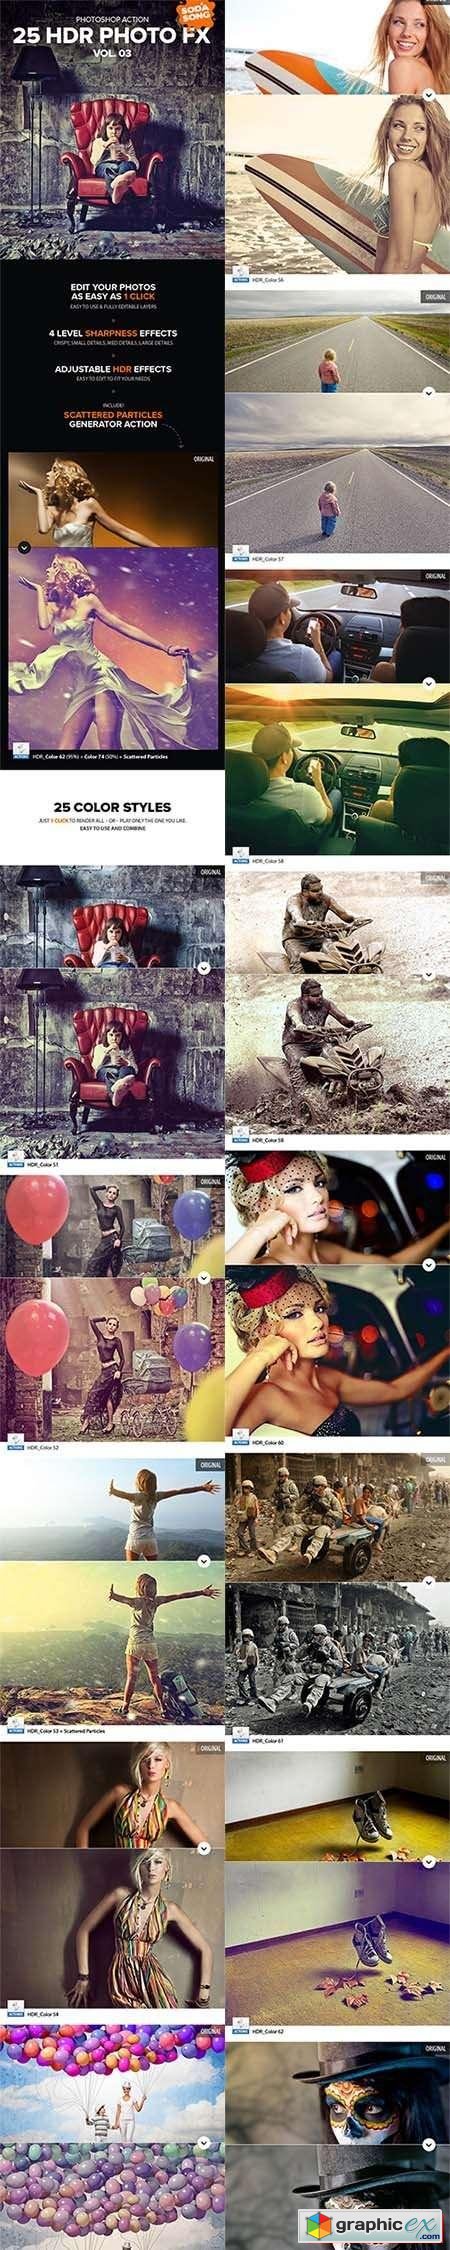 25 hdr photo fx v.3 photoshop action free download